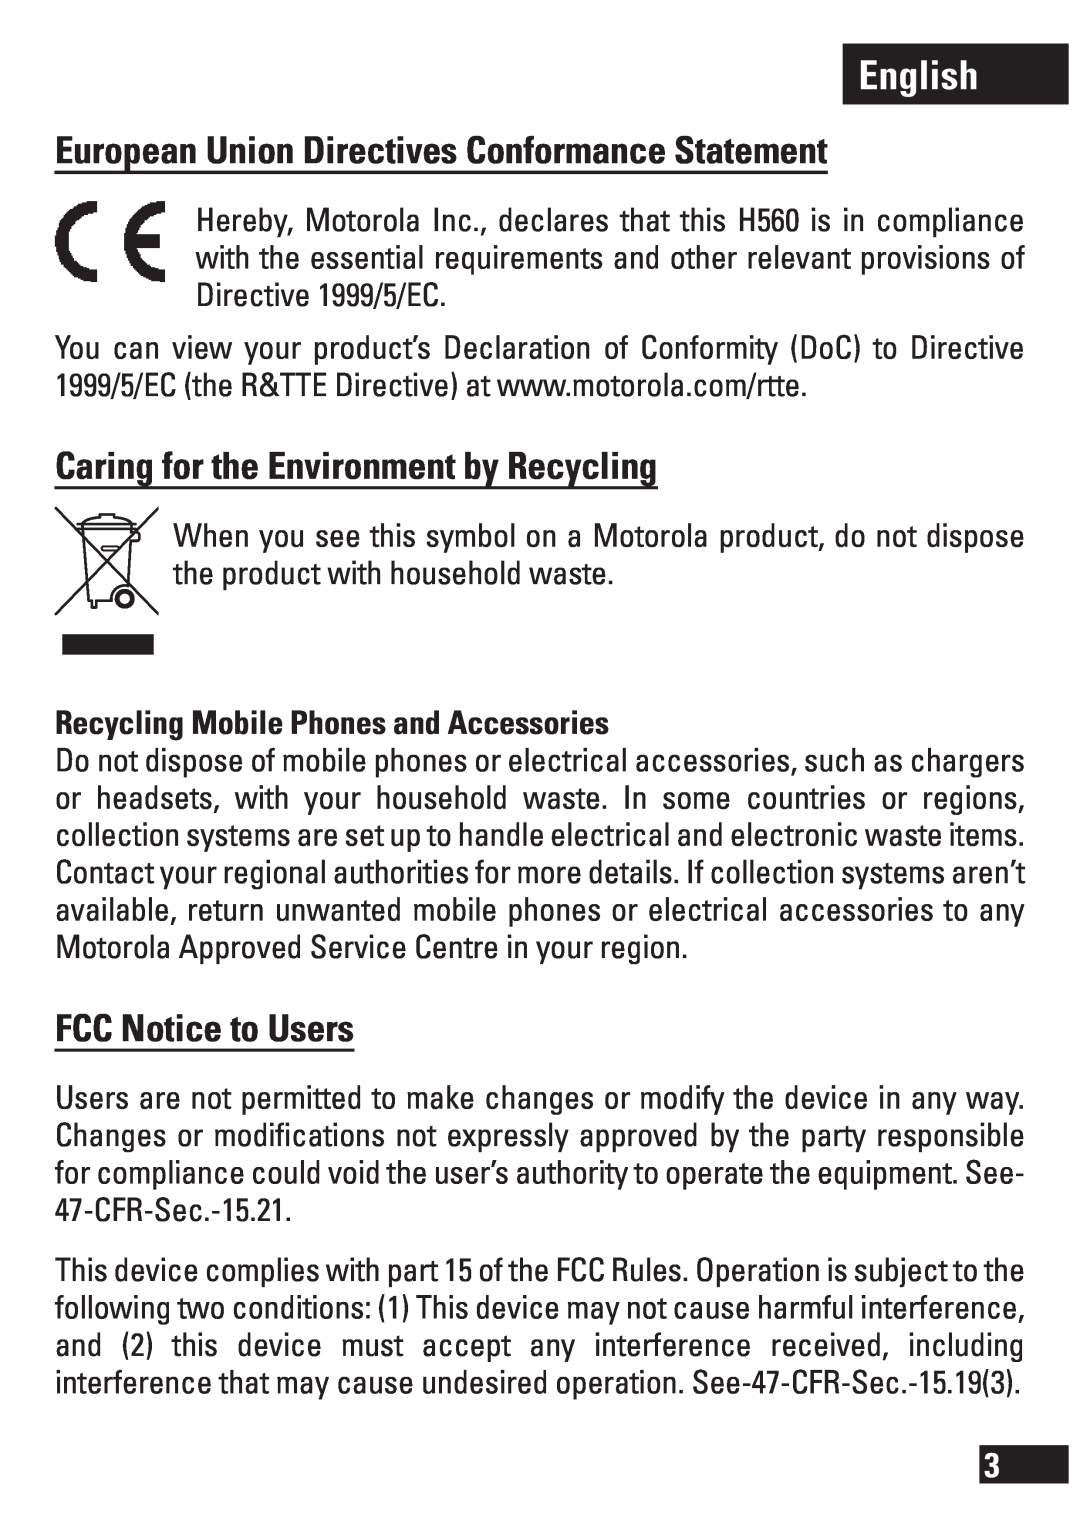 Motorola H560 manual English, European Union Directives Conformance Statement, Caring for the Environment by Recycling 